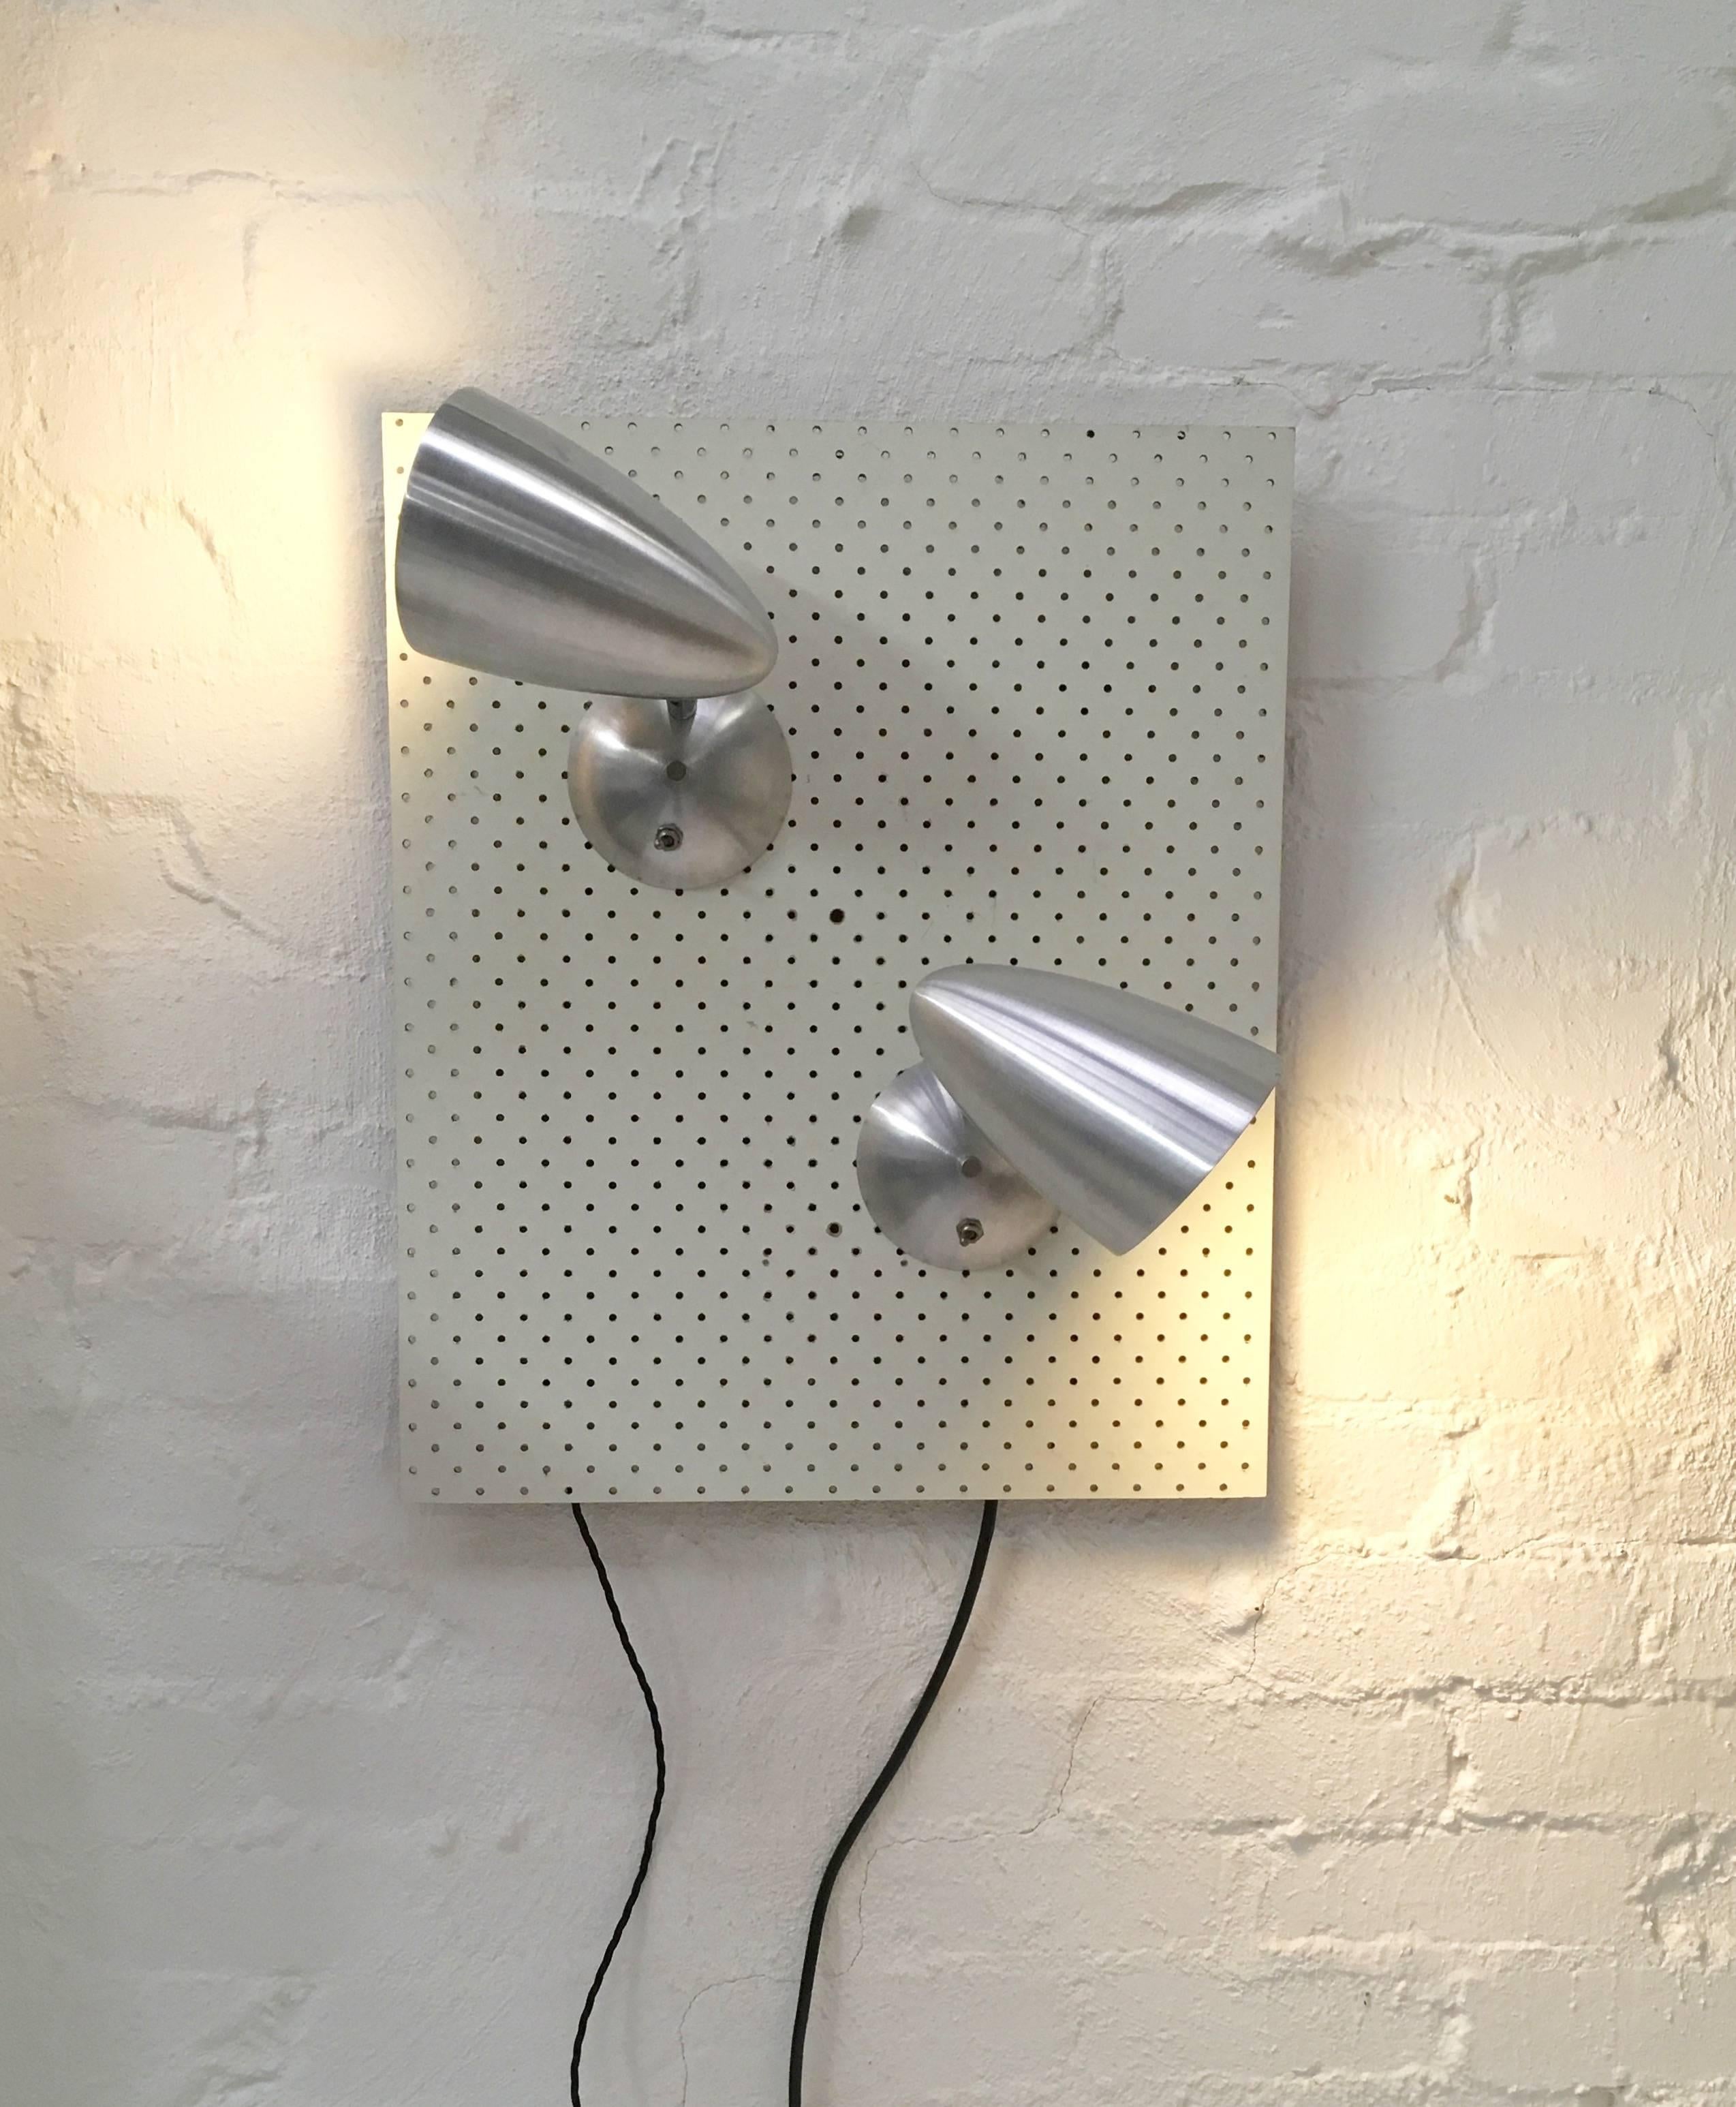 A wonderful pair of wall lights produced by Australia's foremost designer of architectural lighting in the 1950s and 60s, Donald Brown of BECO Lighting. They are in superb condition, fully restored and rewired. 

Australian collectors and